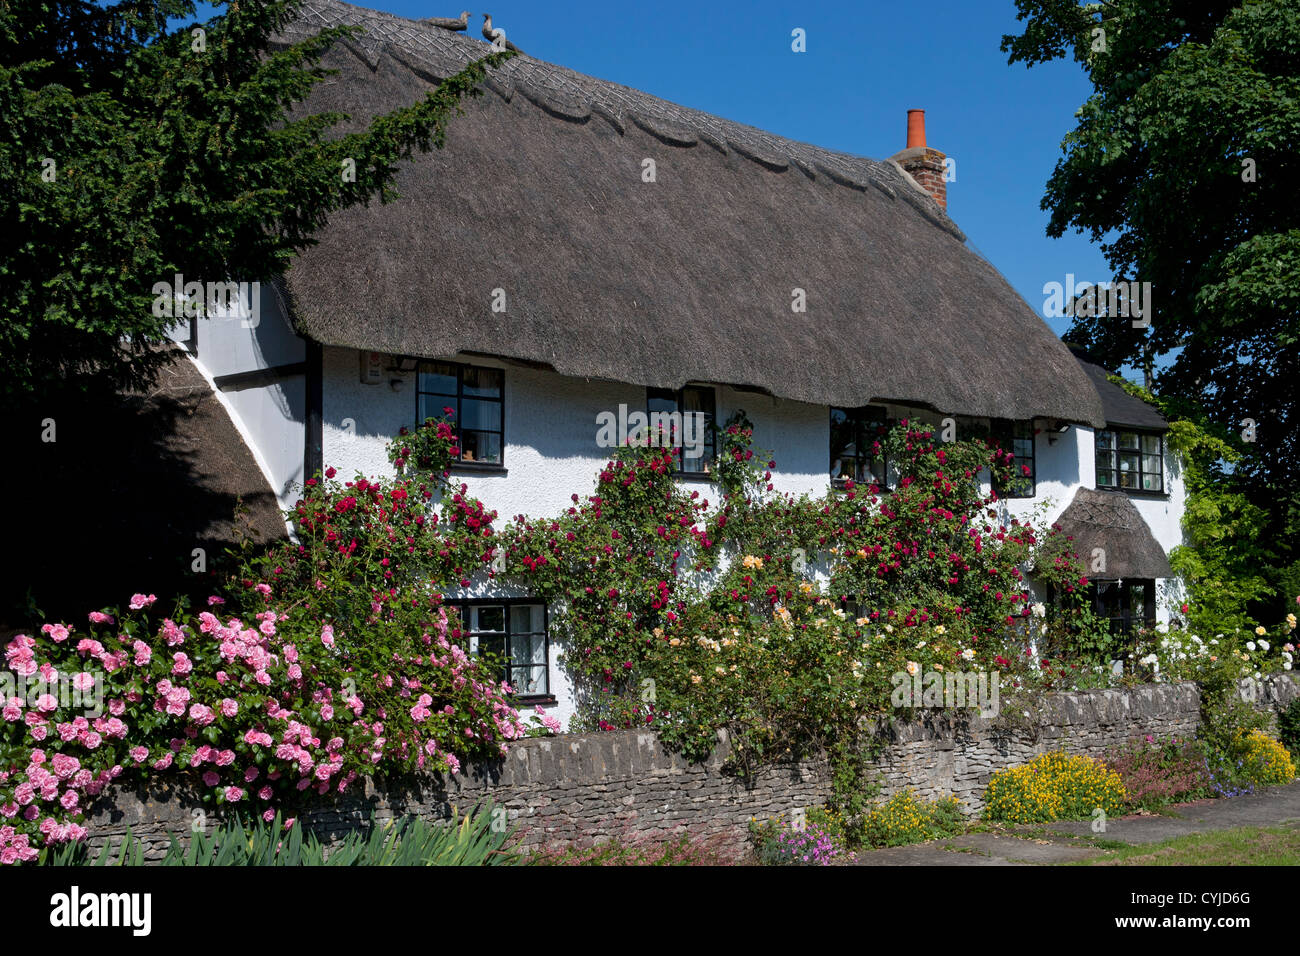 Pretty typical English thatched cottage covered in summer roses, Oxford, England Stock Photo